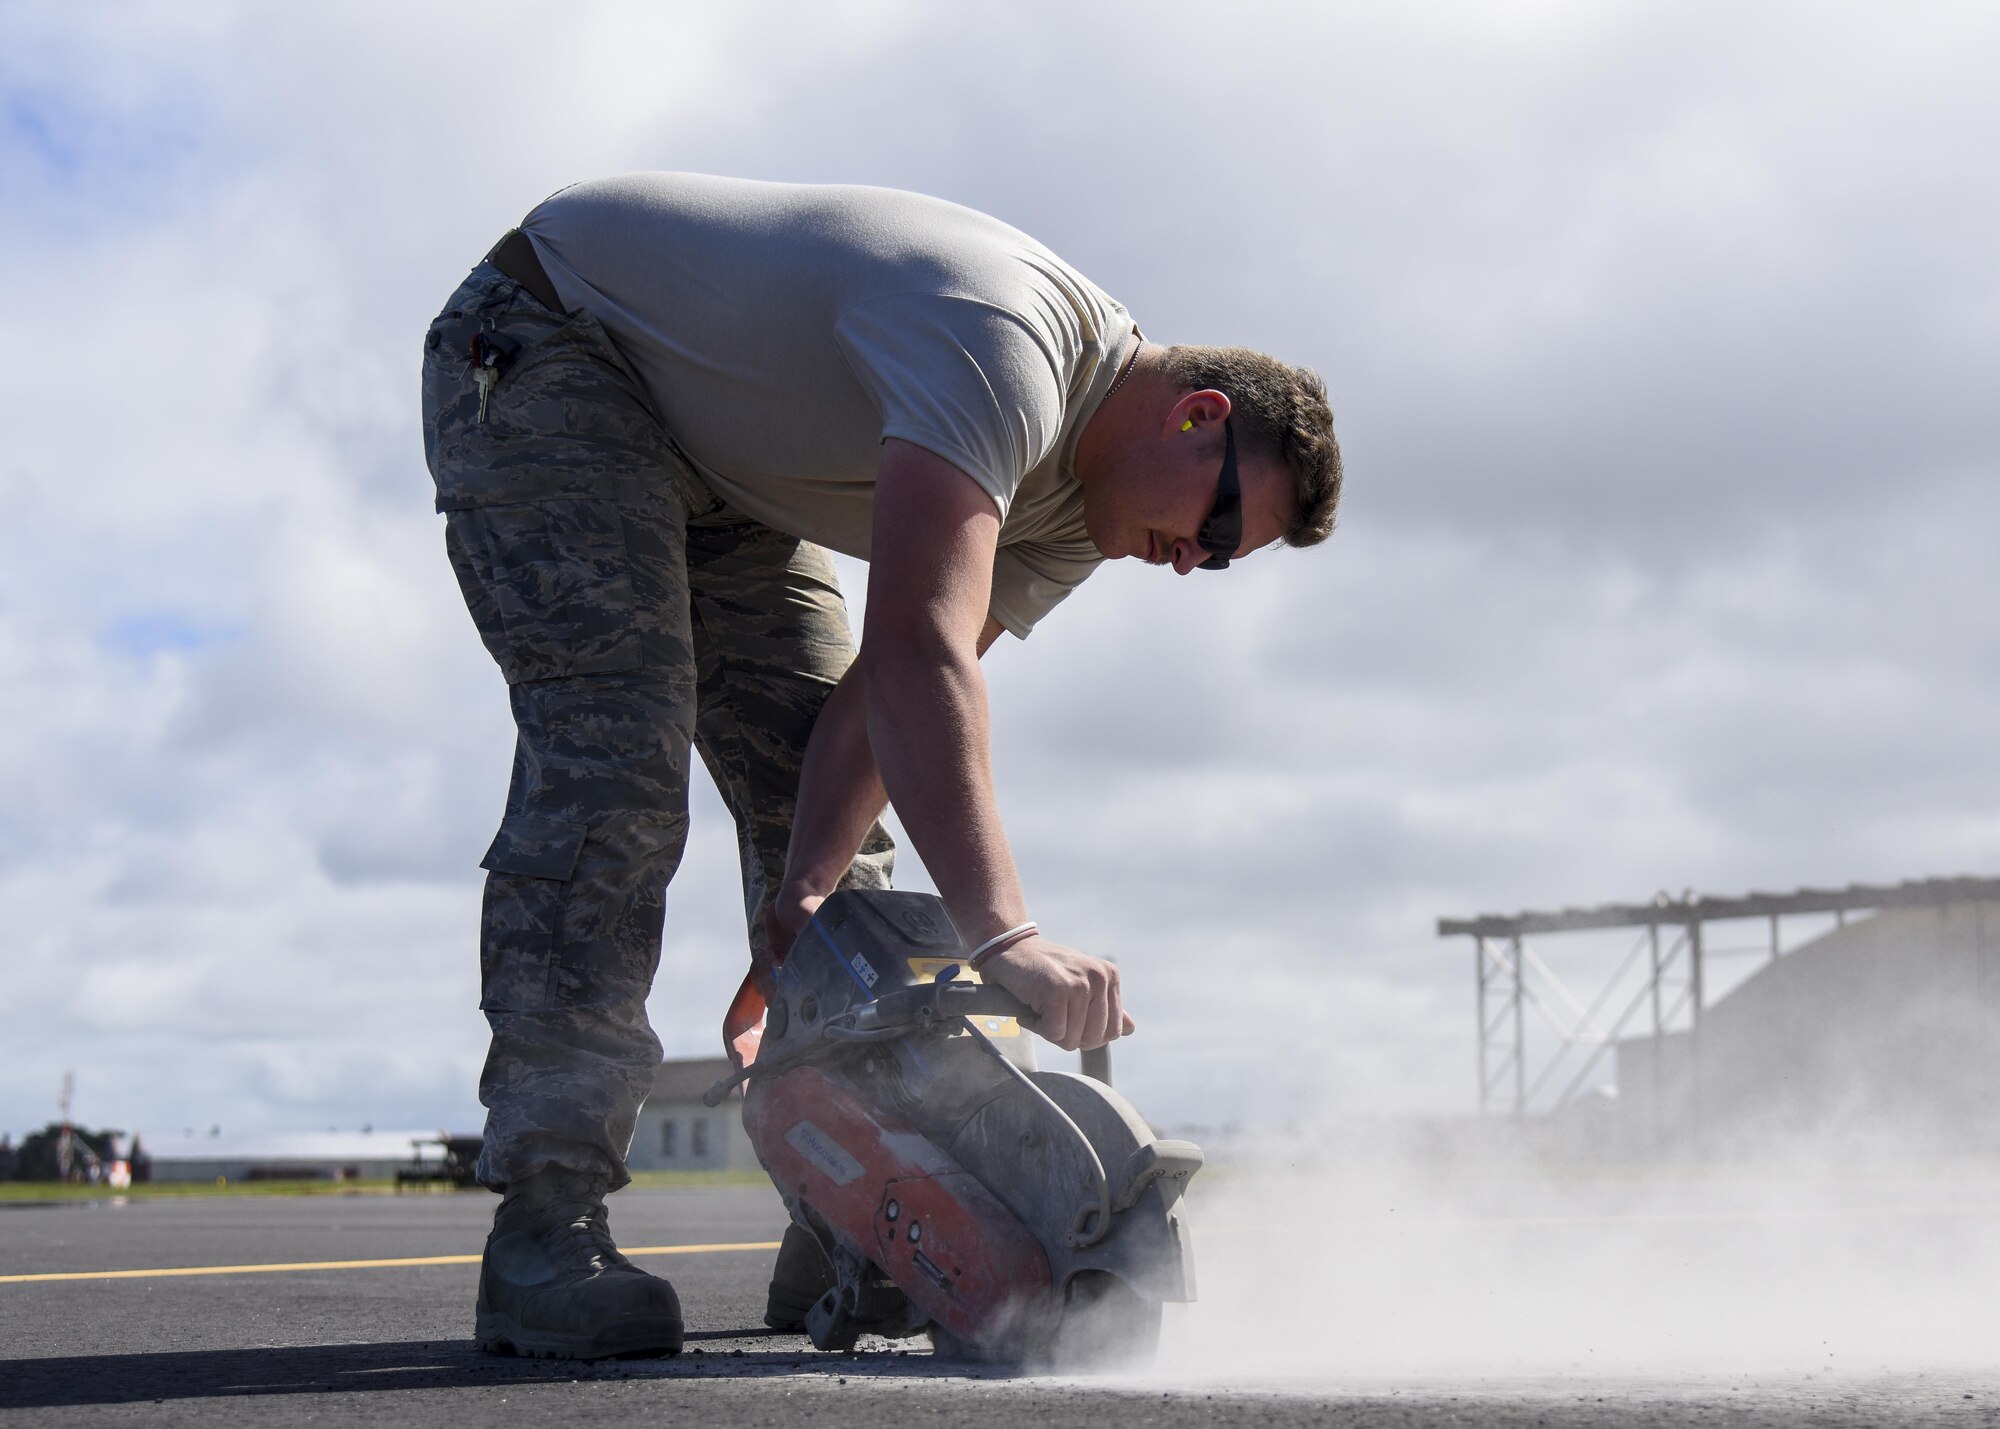 U.S. Air Force Staff Sgt. Trevor Harrison, 633rd Civil Engineer Squadron pavements and construction craftsman cuts the pavement with a power saw at Joint Base Langley-Eustis, Va., Sept. 25, 2017.